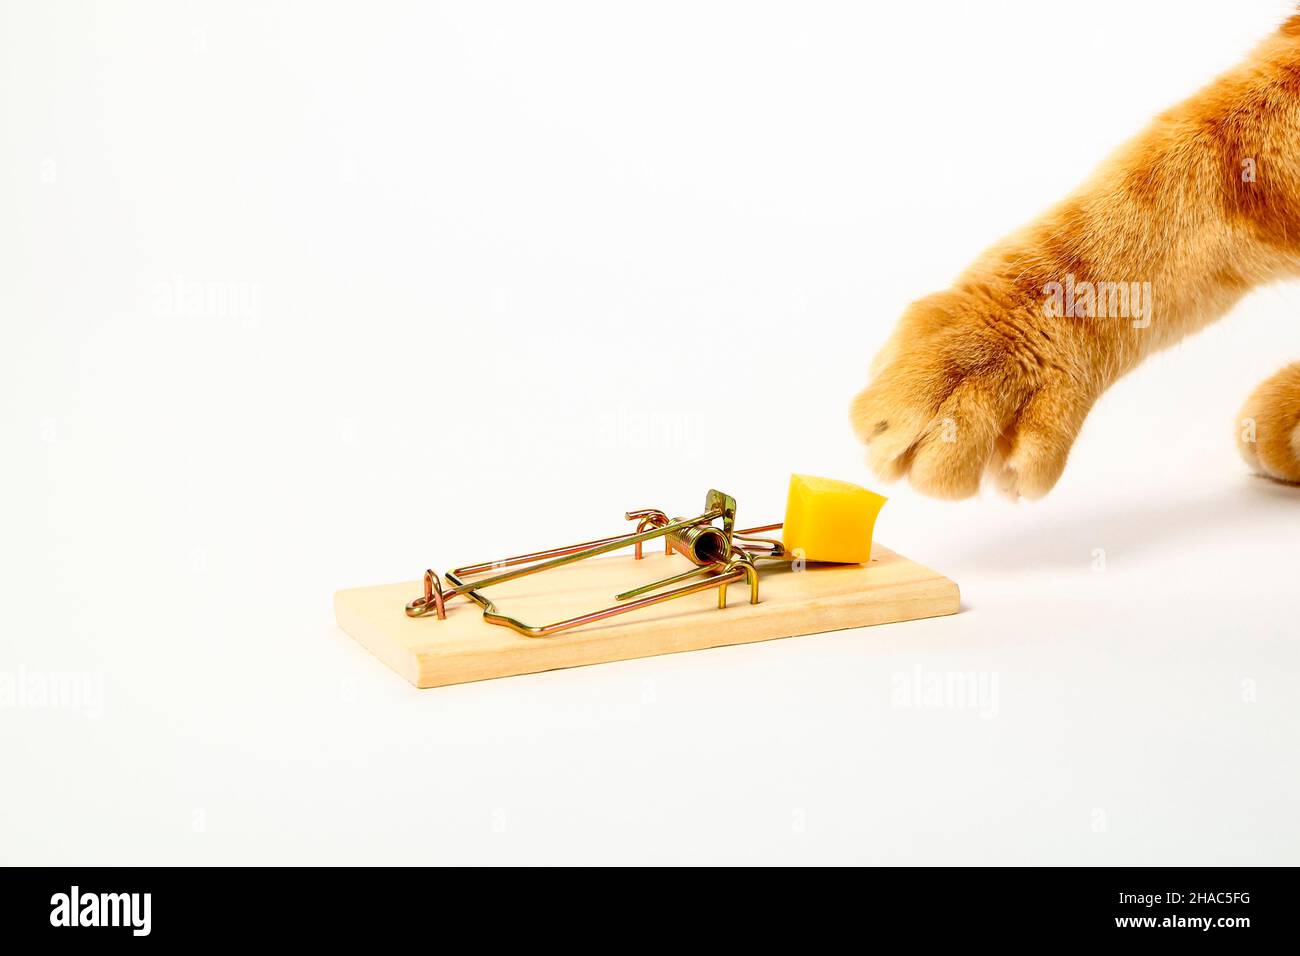 Conceptual image of a ginger tabby cat either baiting a mousetrap with  cheese to catch a mouse or taking the cheese from the trap Stock Photo -  Alamy